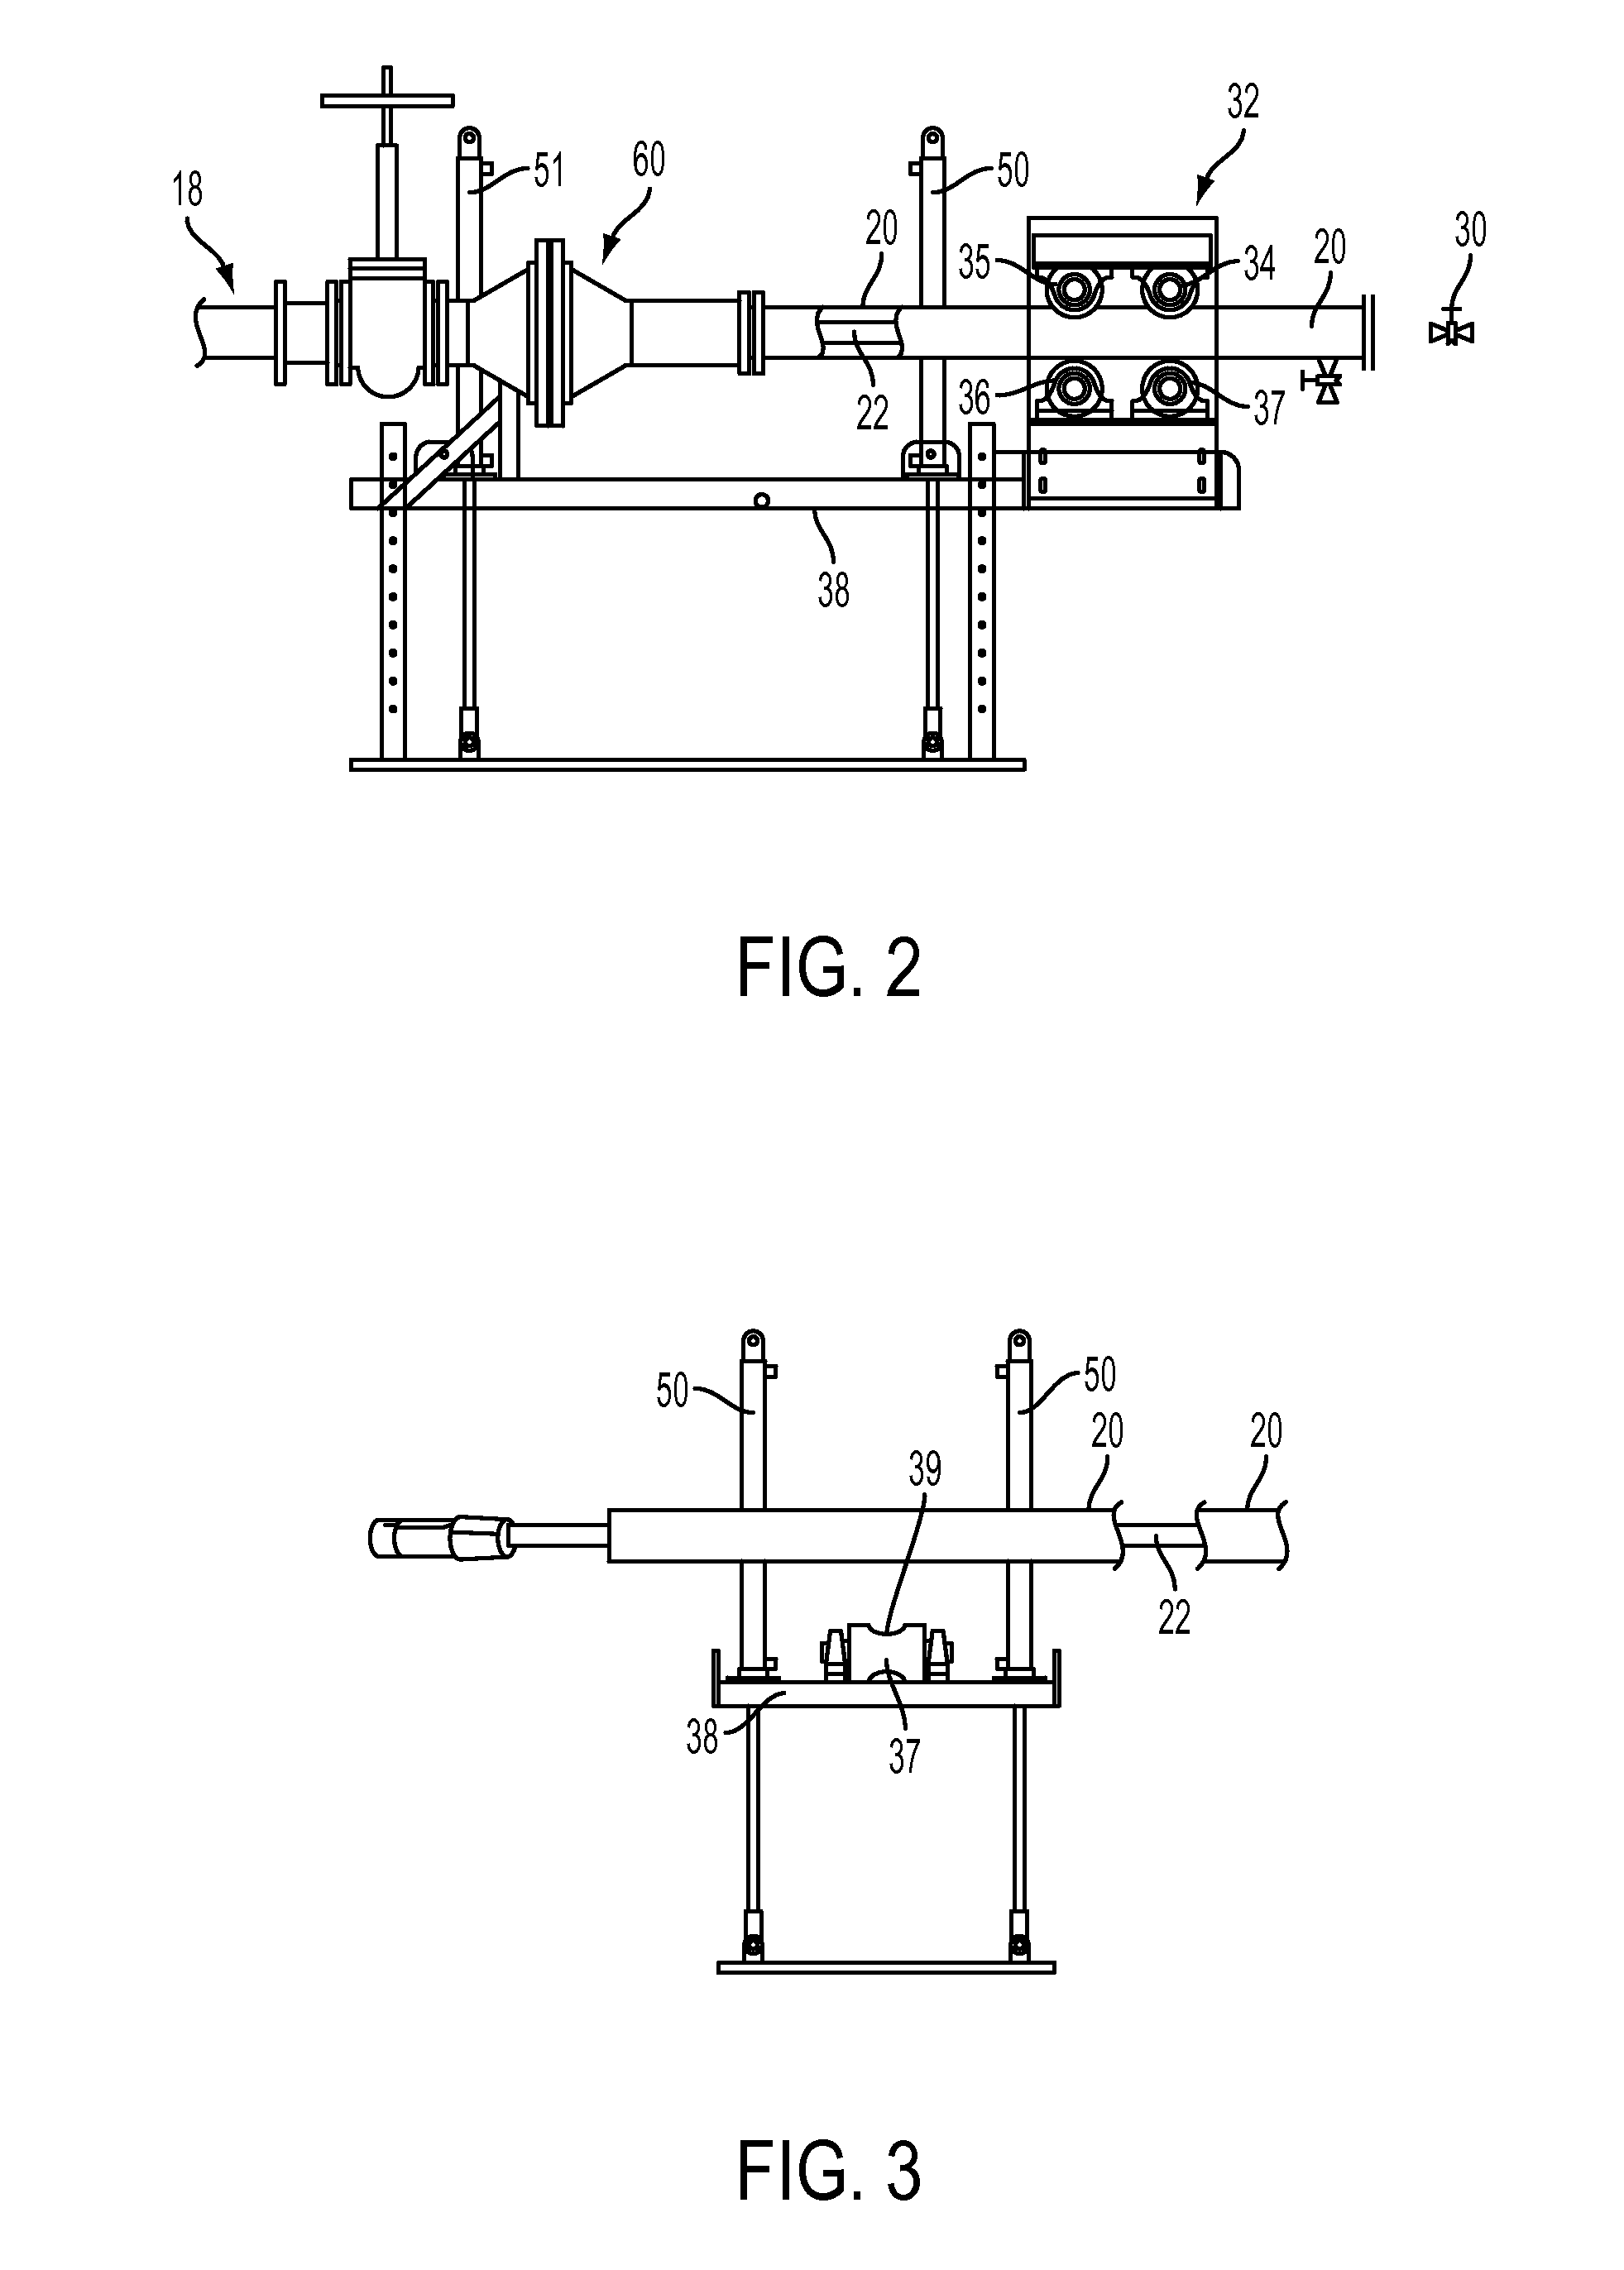 System and method for removing sludge from a storage tank